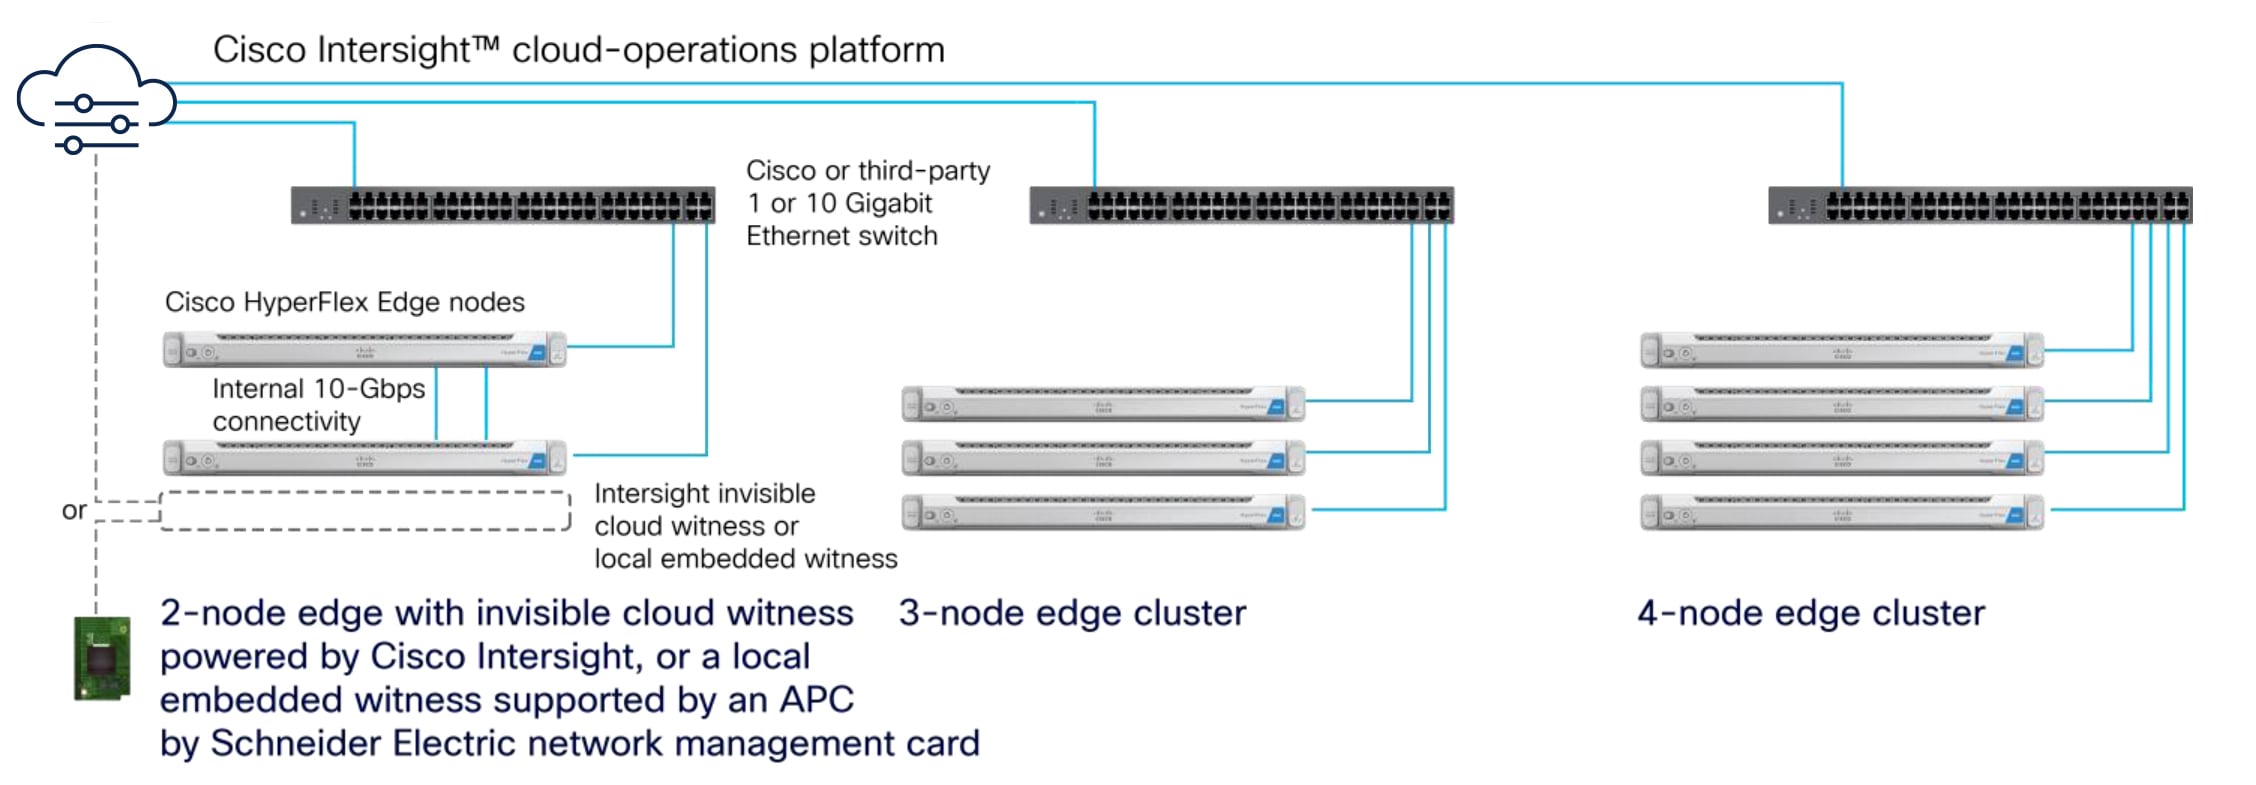 Cisco HyperFlex Edge delivers a preintegrated, compact cluster to remote-office and branch-office locations